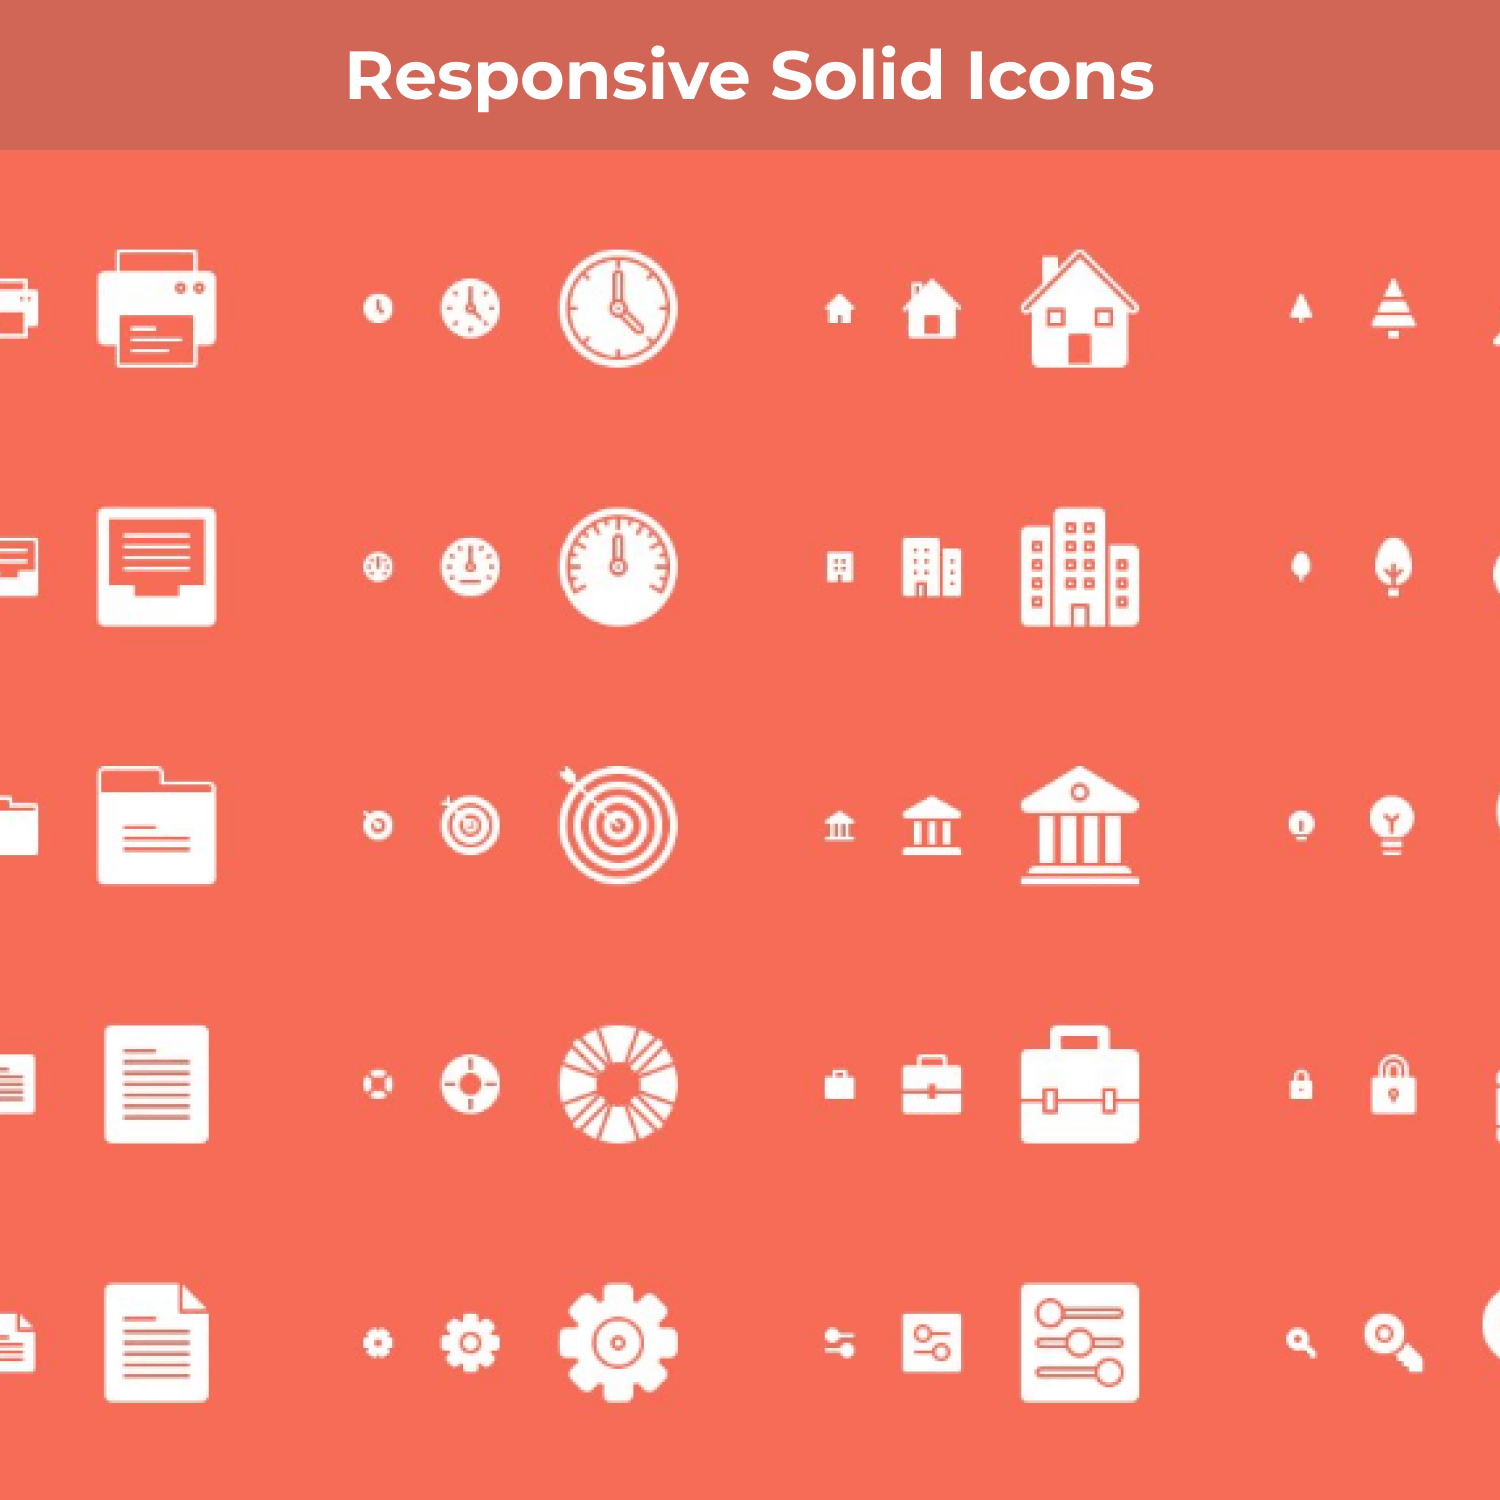 Responsive Solid Icons cover image.